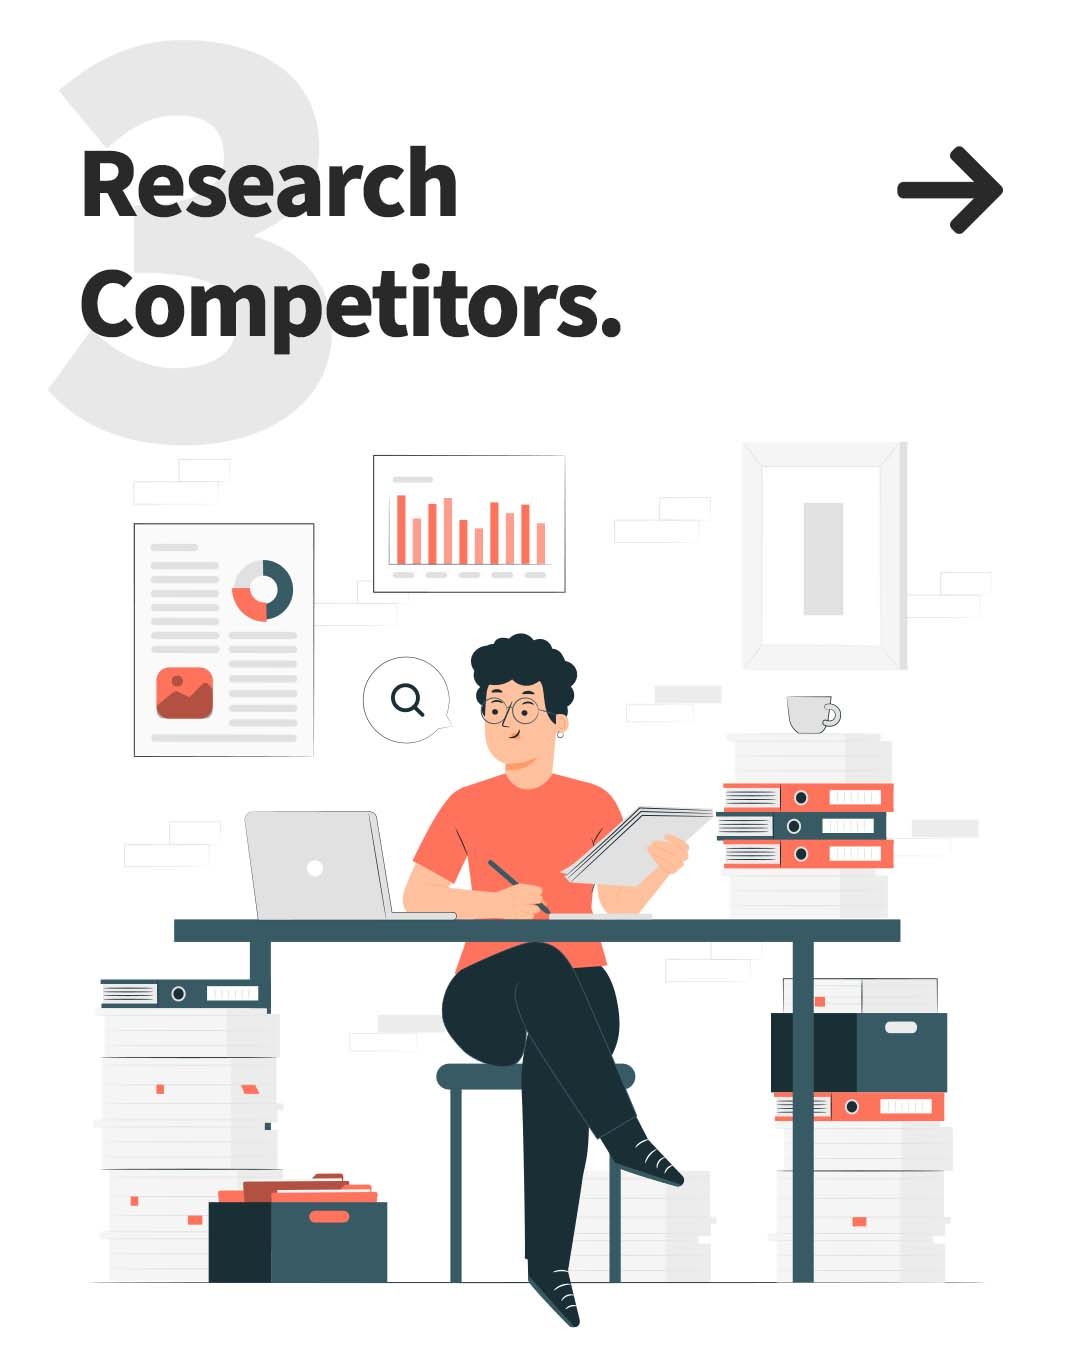 3. Research Competitors